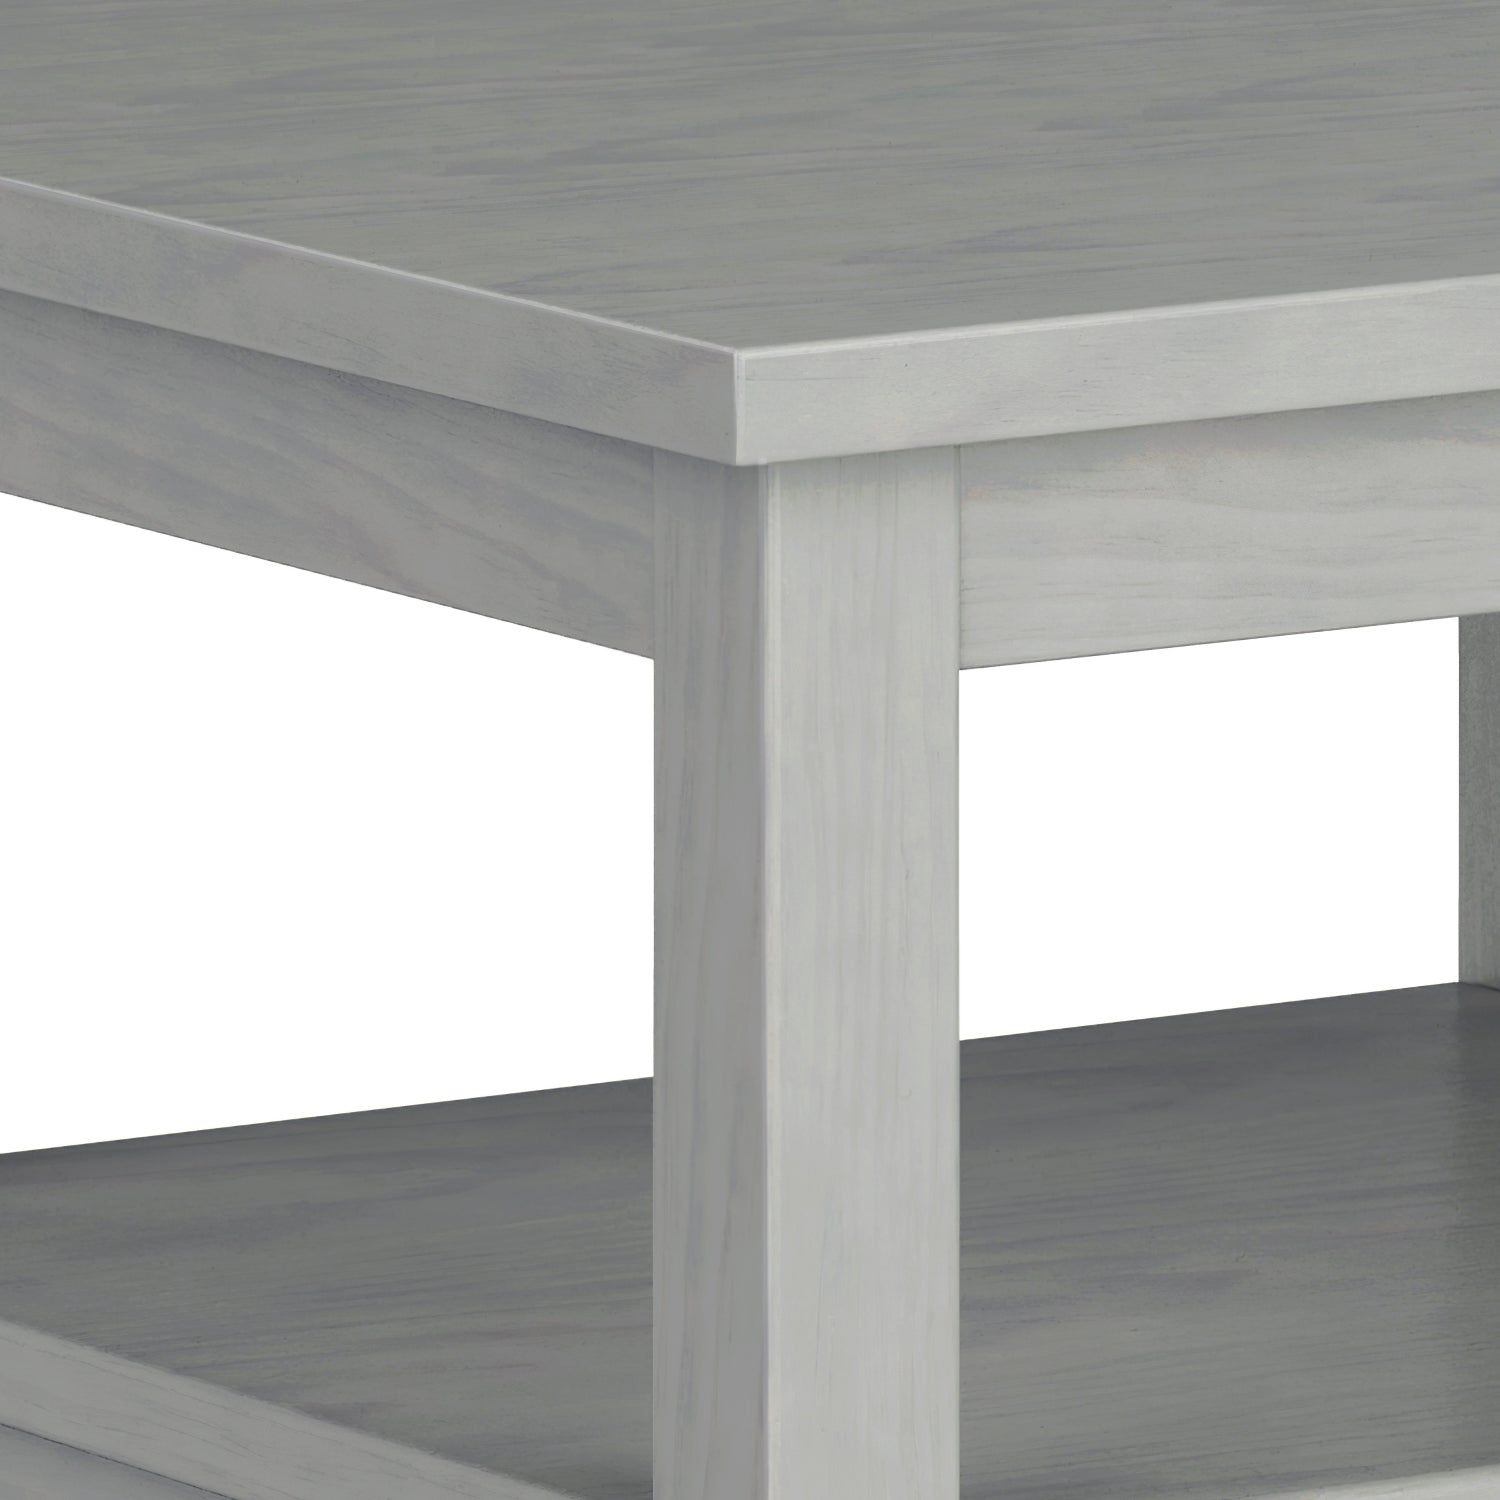 Eon Solid Wood End Table with Drawer - End Tables